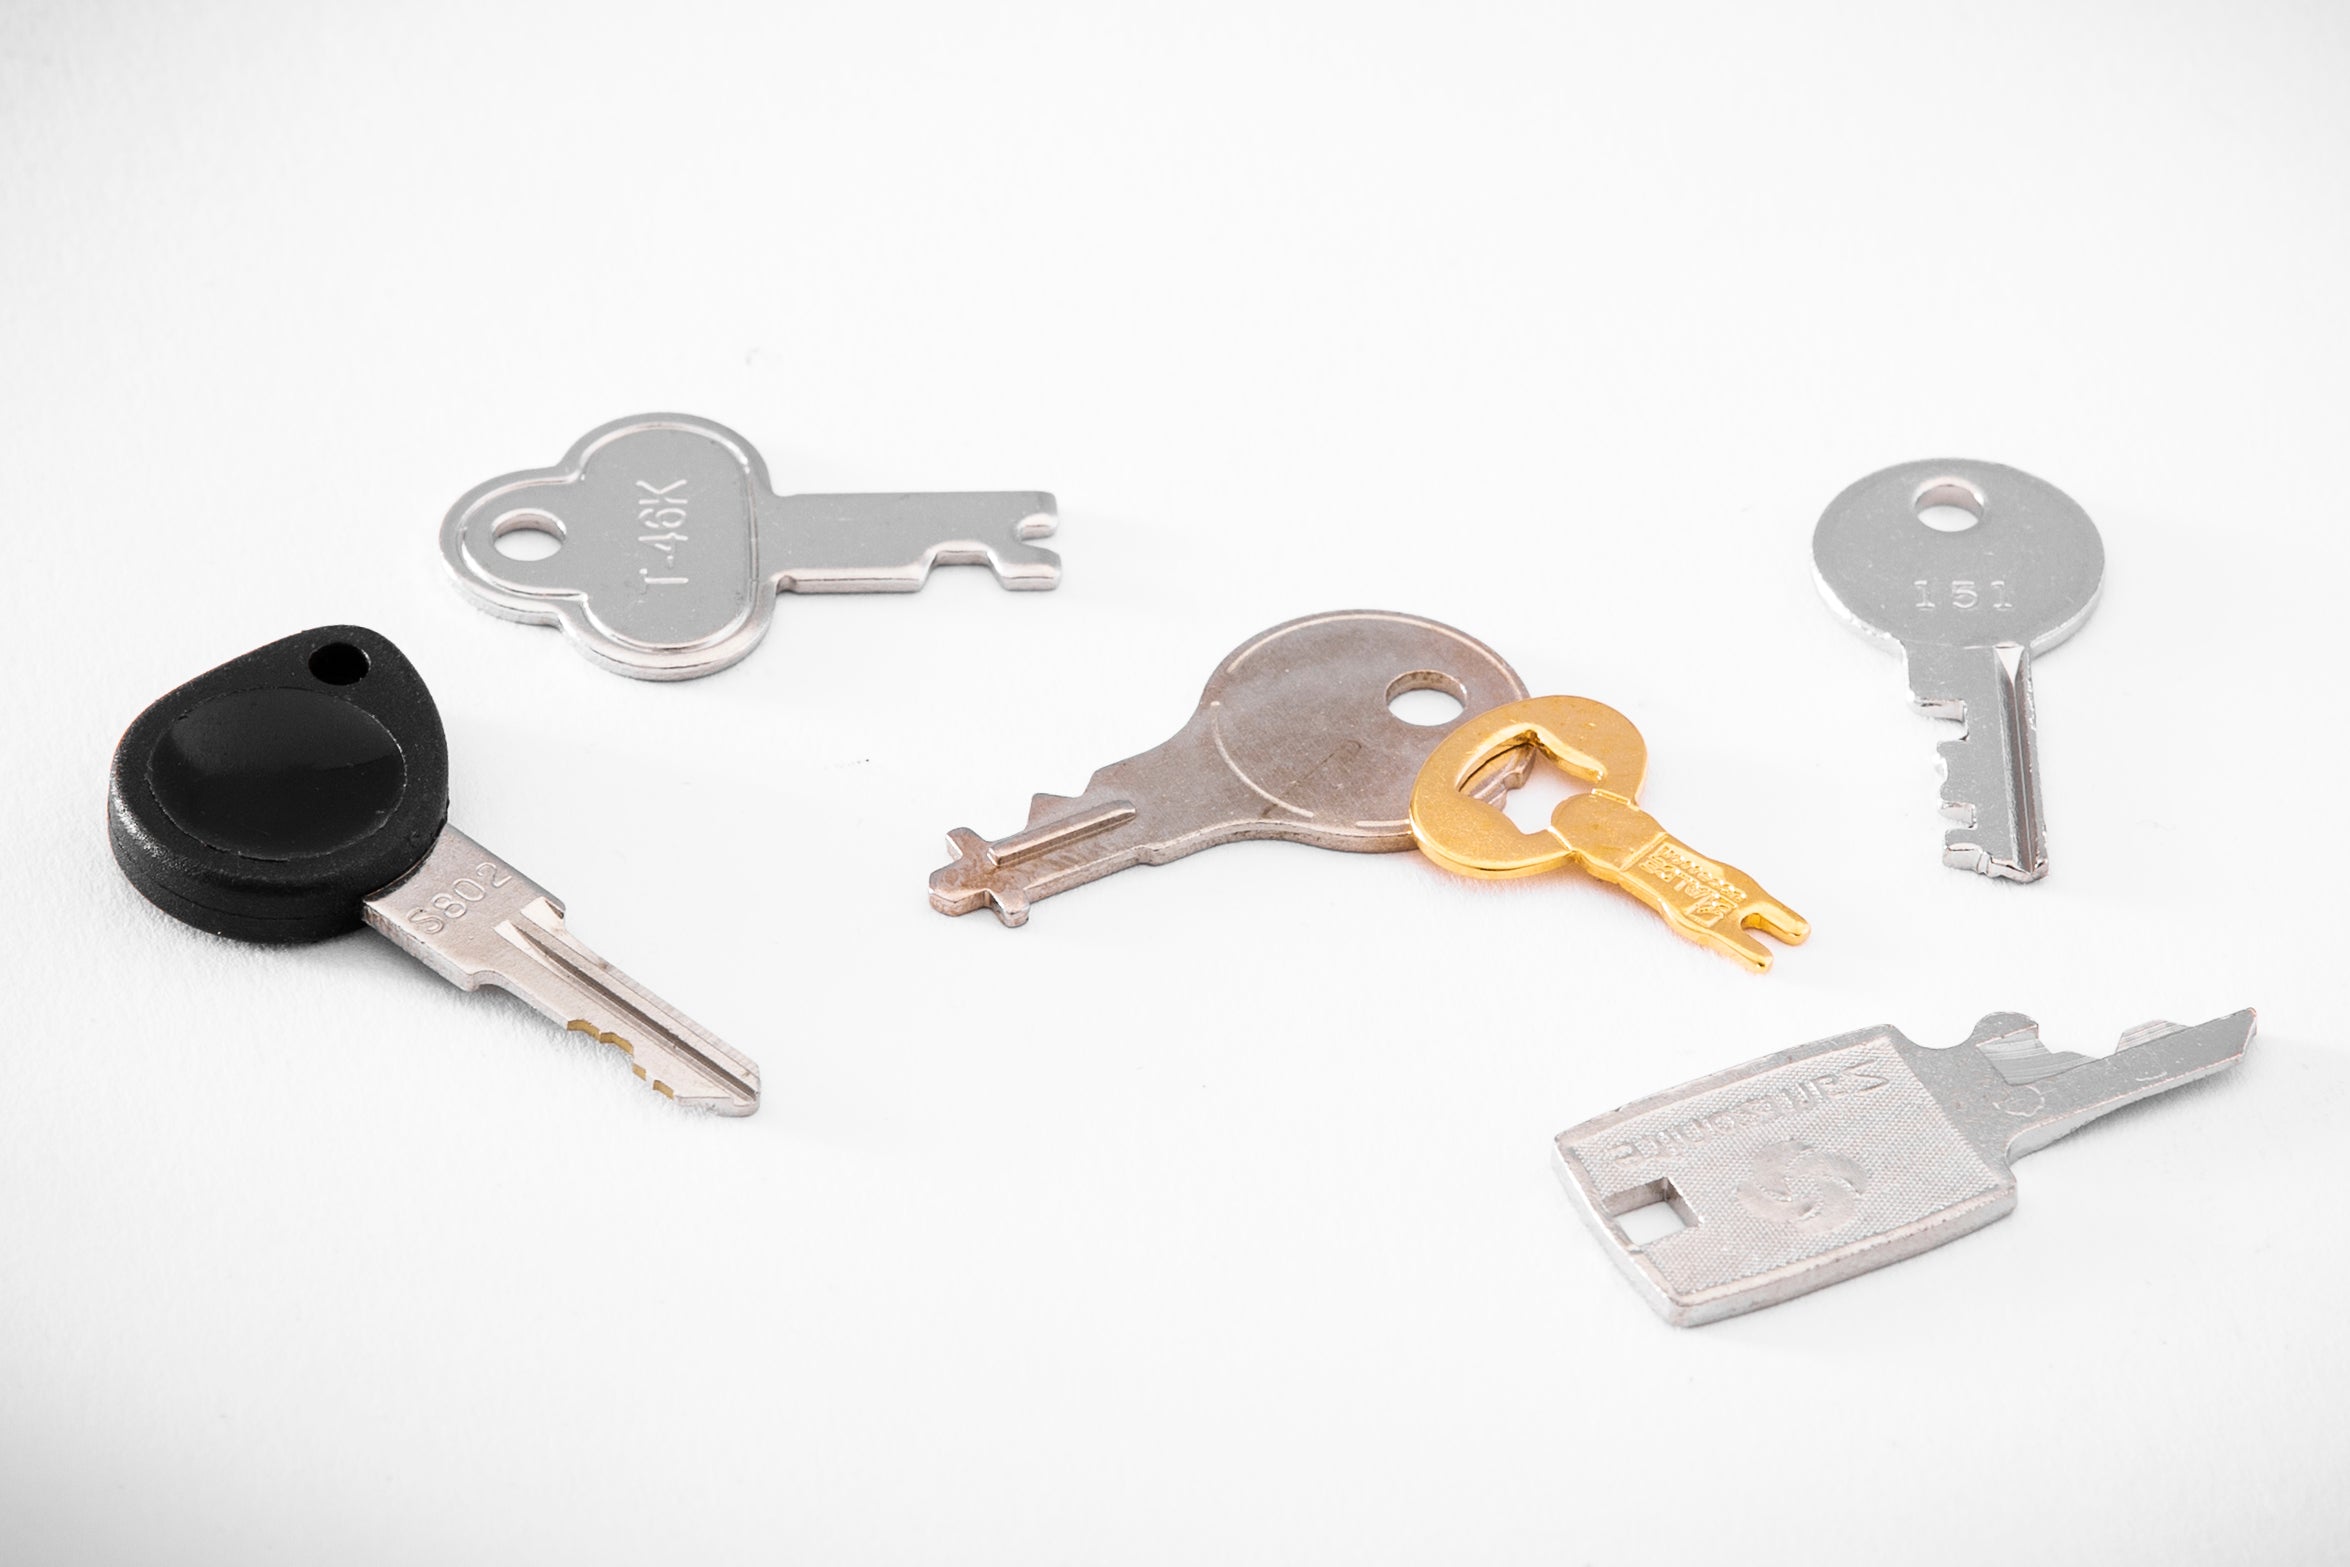 Trunk & Luggage Keys & Replacements - Weaver Leather Supply